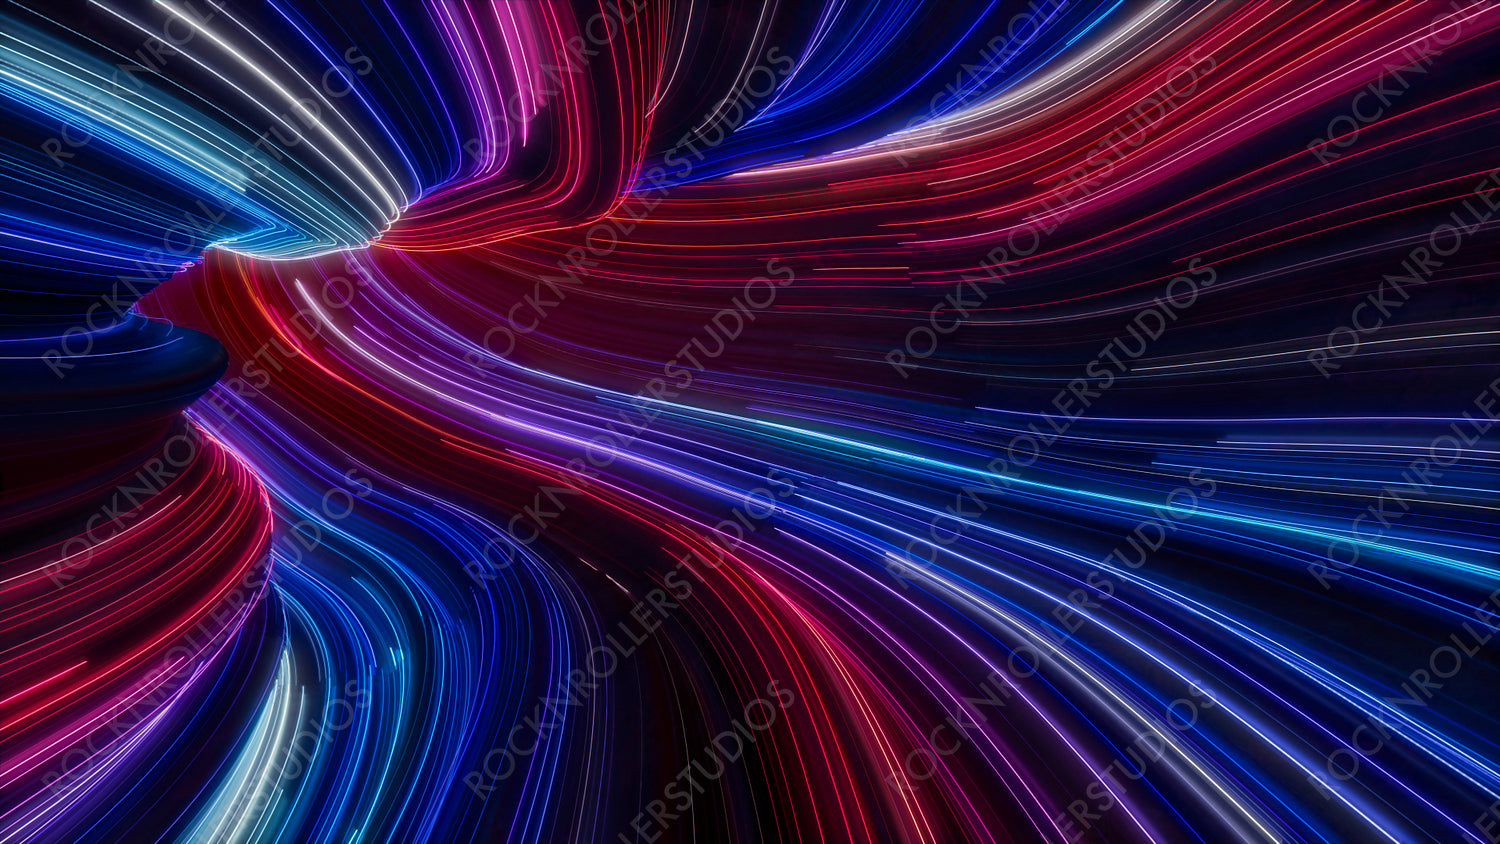 Colorful Swoosh Tunnel with Blue, Pink and Purple Curves. 3D Render.